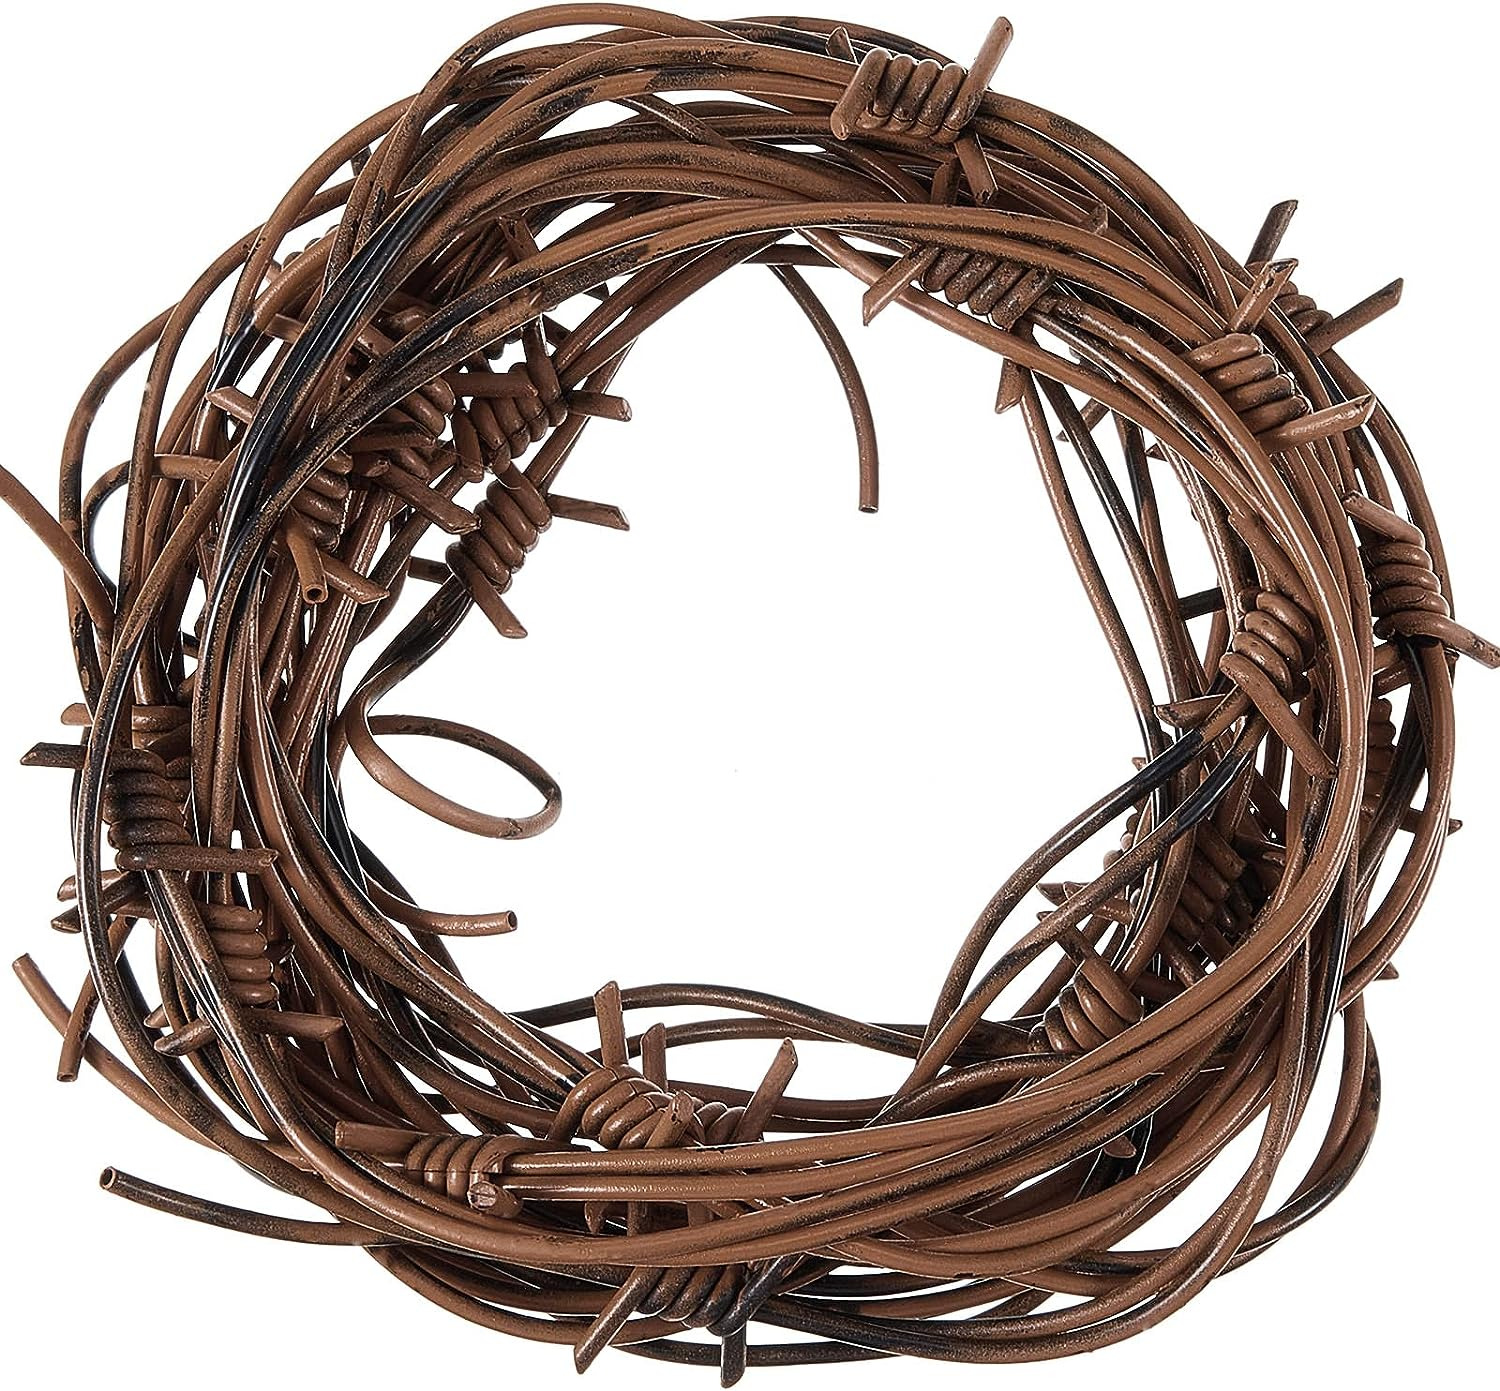 32 Foot Fake Rusted Barbed Wire Decoration 4 Pcs Halloween Plastic Barb Wire Dec